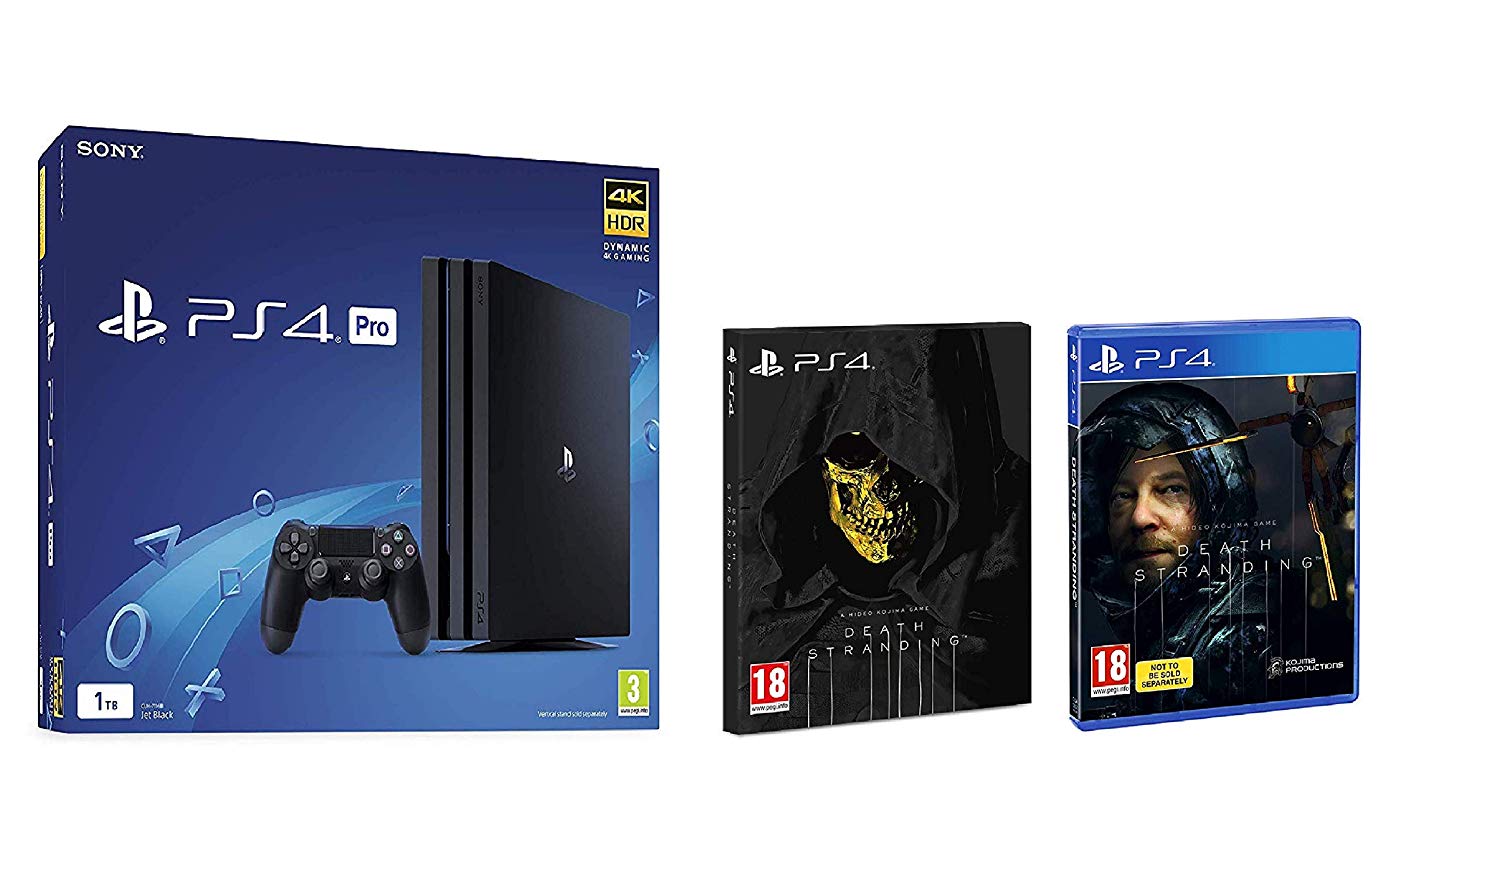 Postabargain Twitter: "Sony Playstation 4 Pro 1TB Console + Death Stranding Standard Edition (Higgs Variant) (PS4) - £269.99 https://t.co/e499tWmVHS" / Twitter